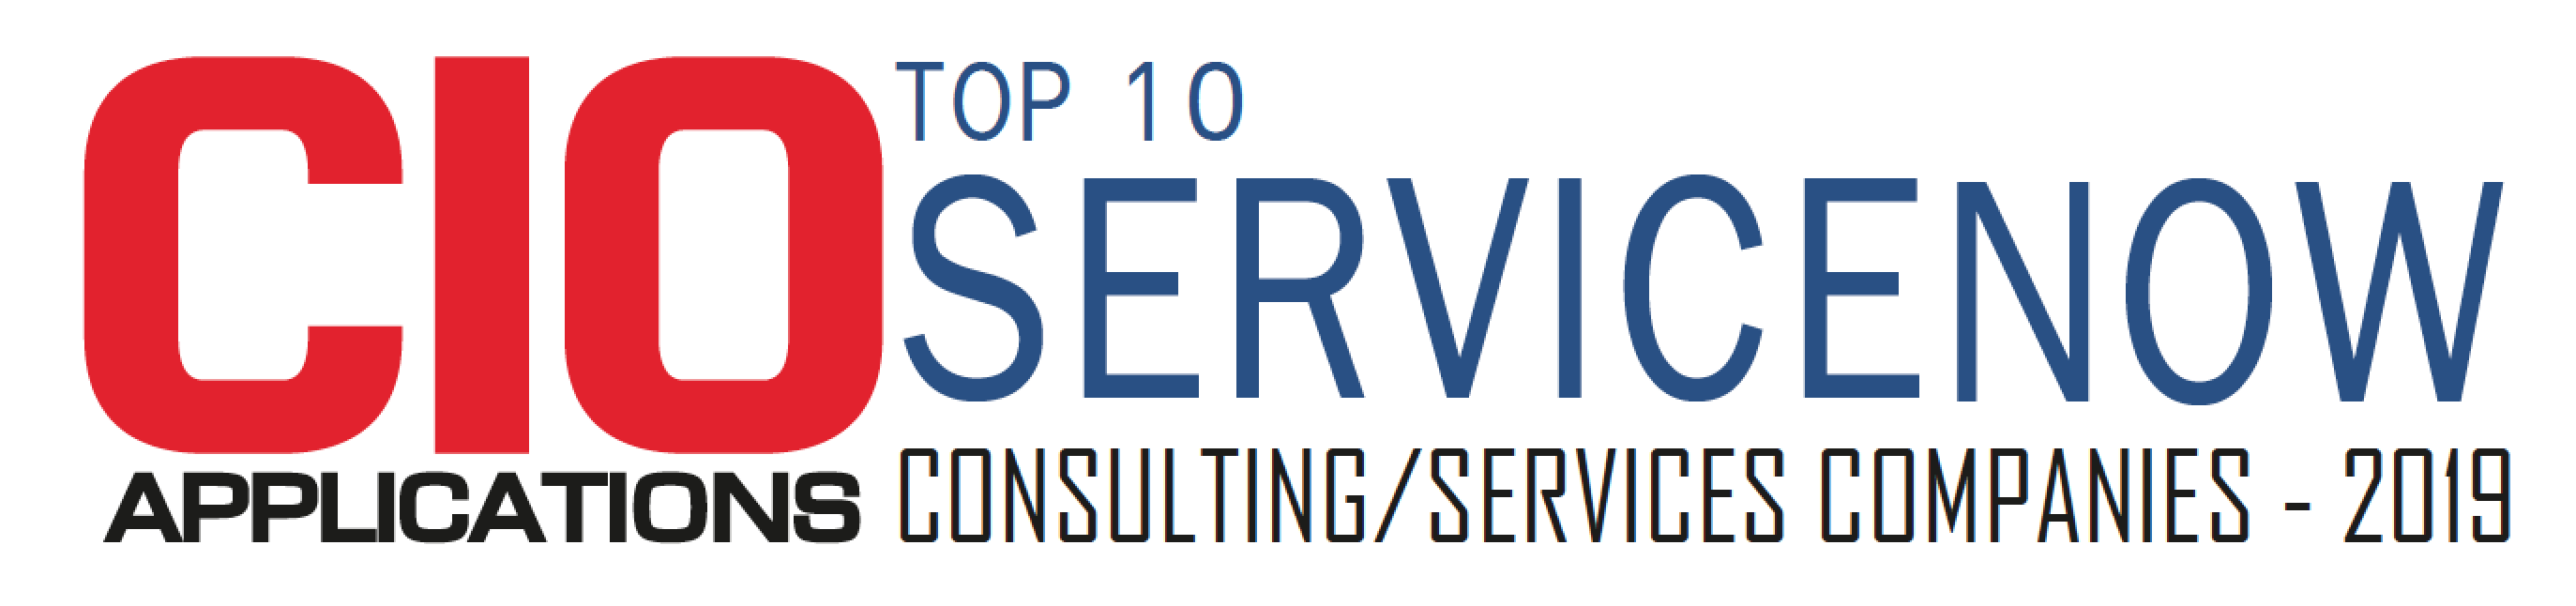 CIO Applications Top 10 ServiceNow Consulting and Services Companies 2019